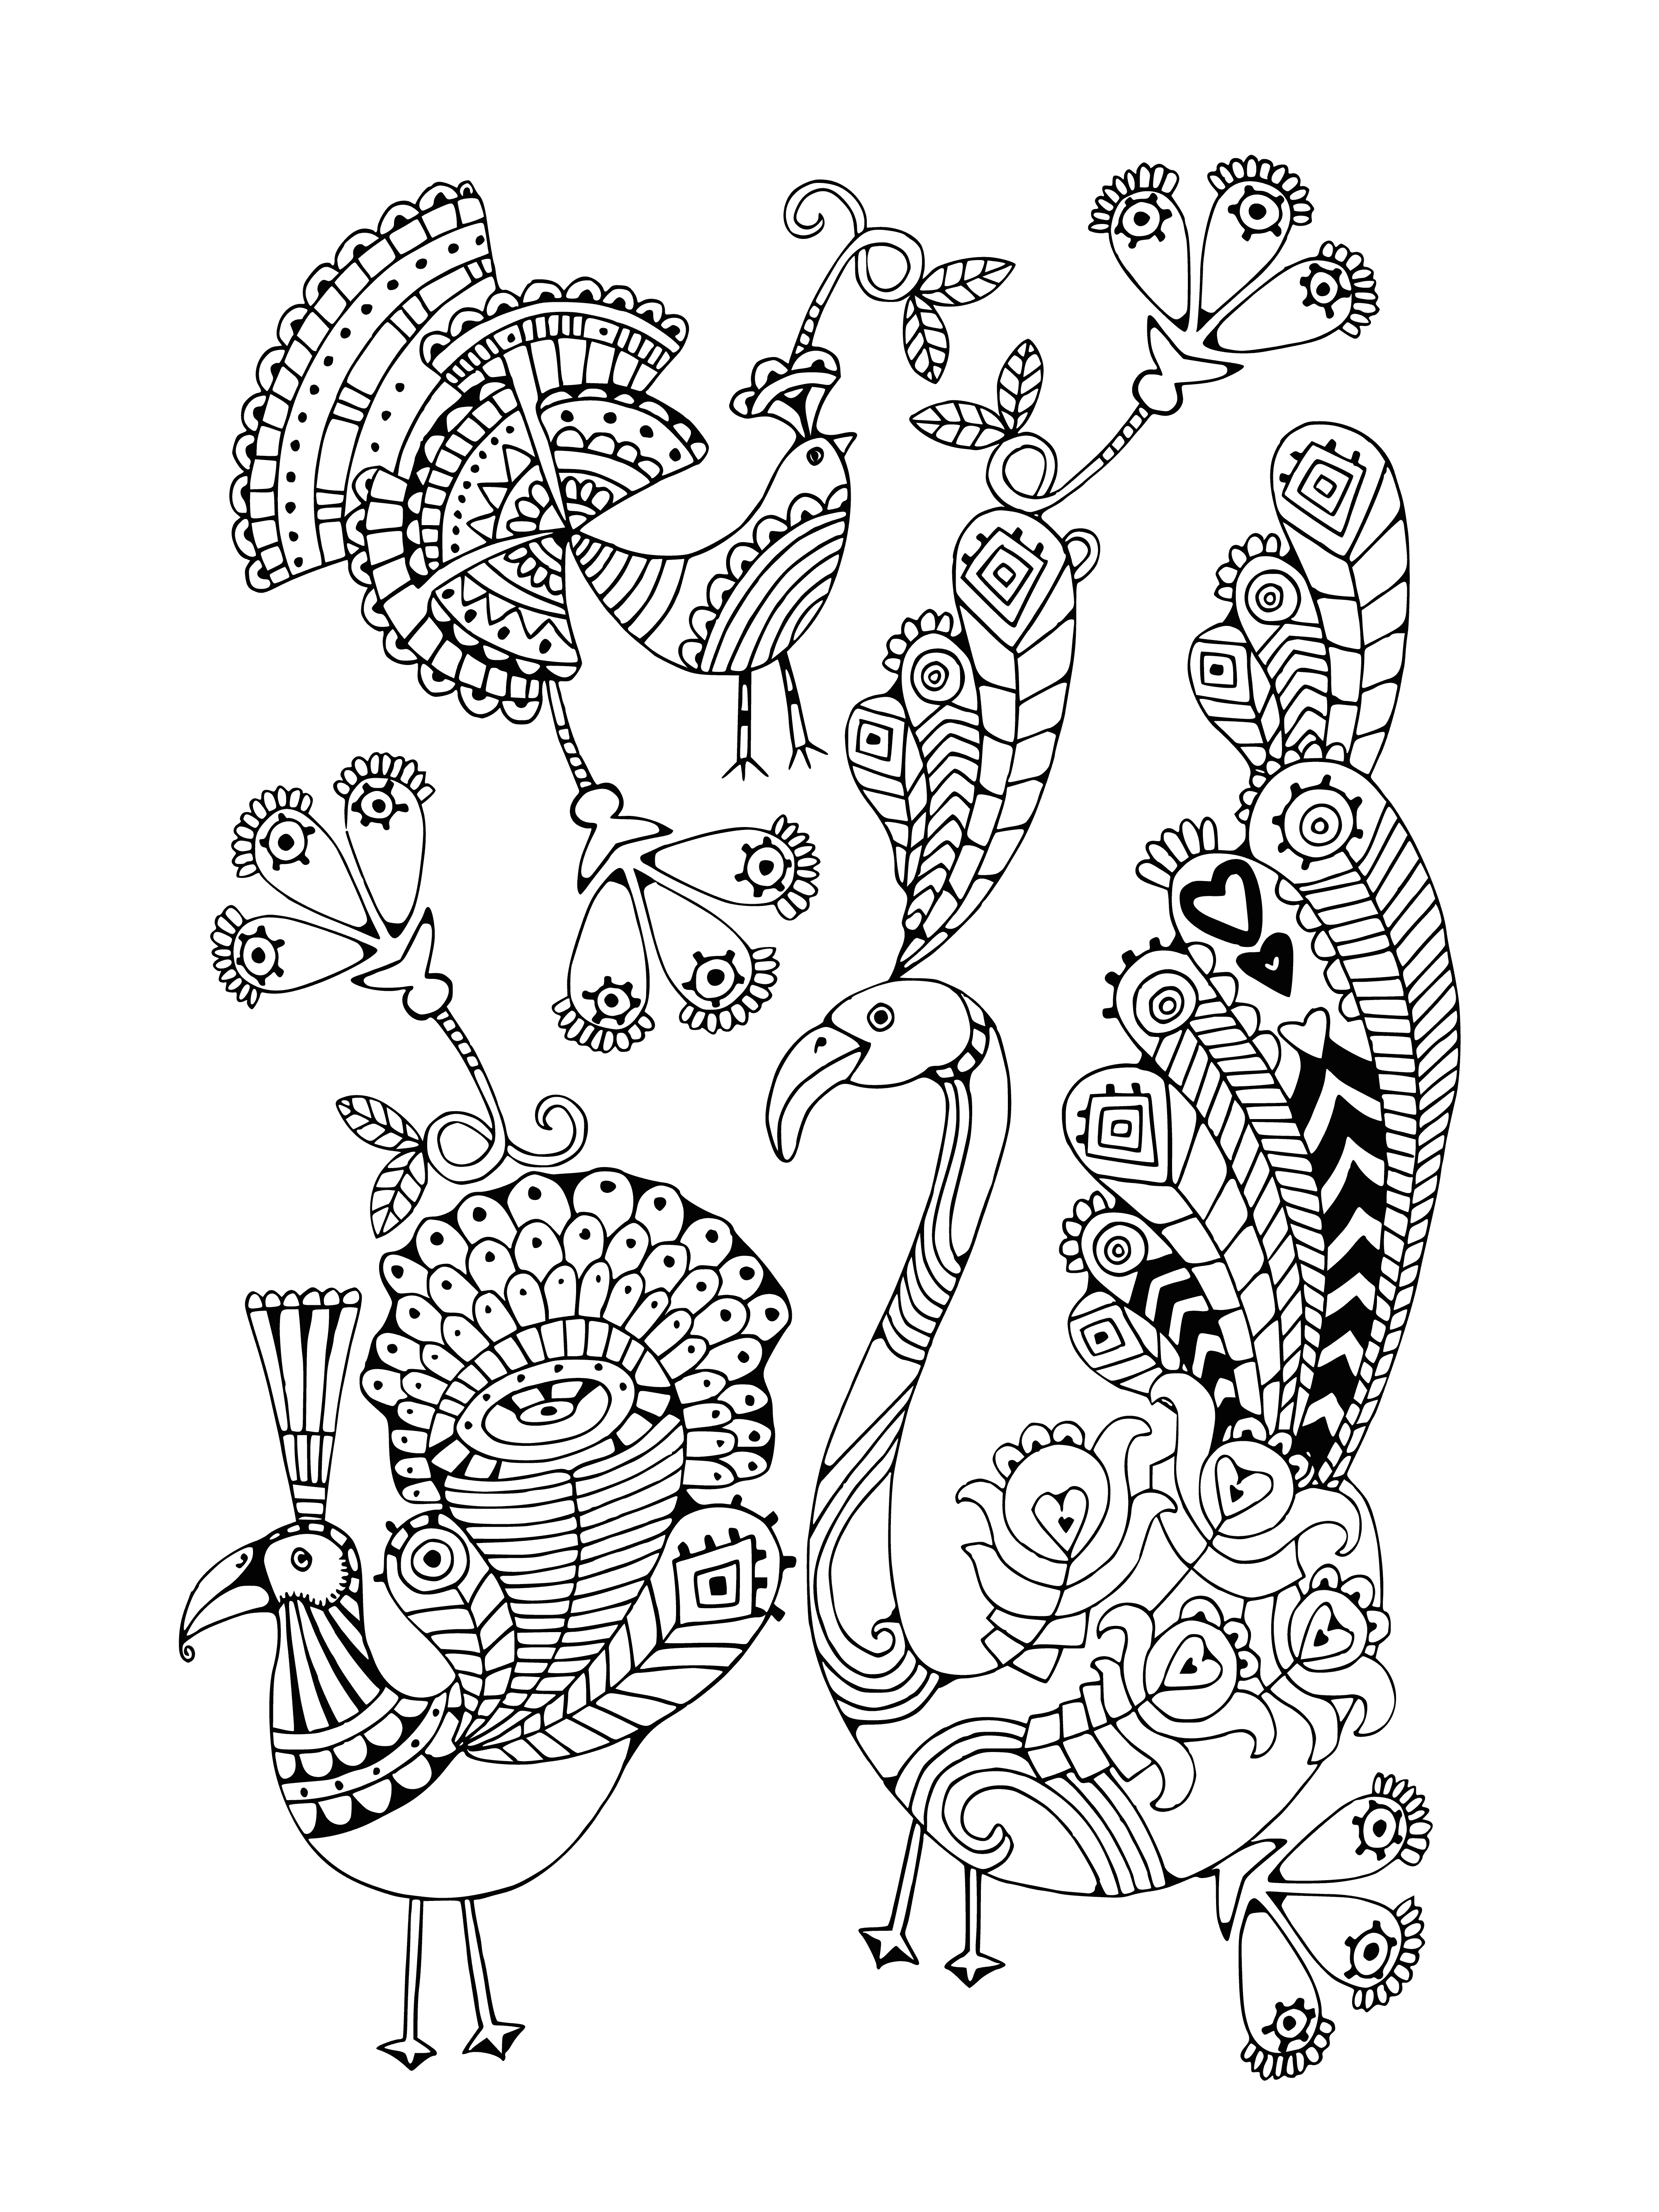 coloring page: → Two peacocks facing each other, tails spread out with intricate patterns, beaks open.